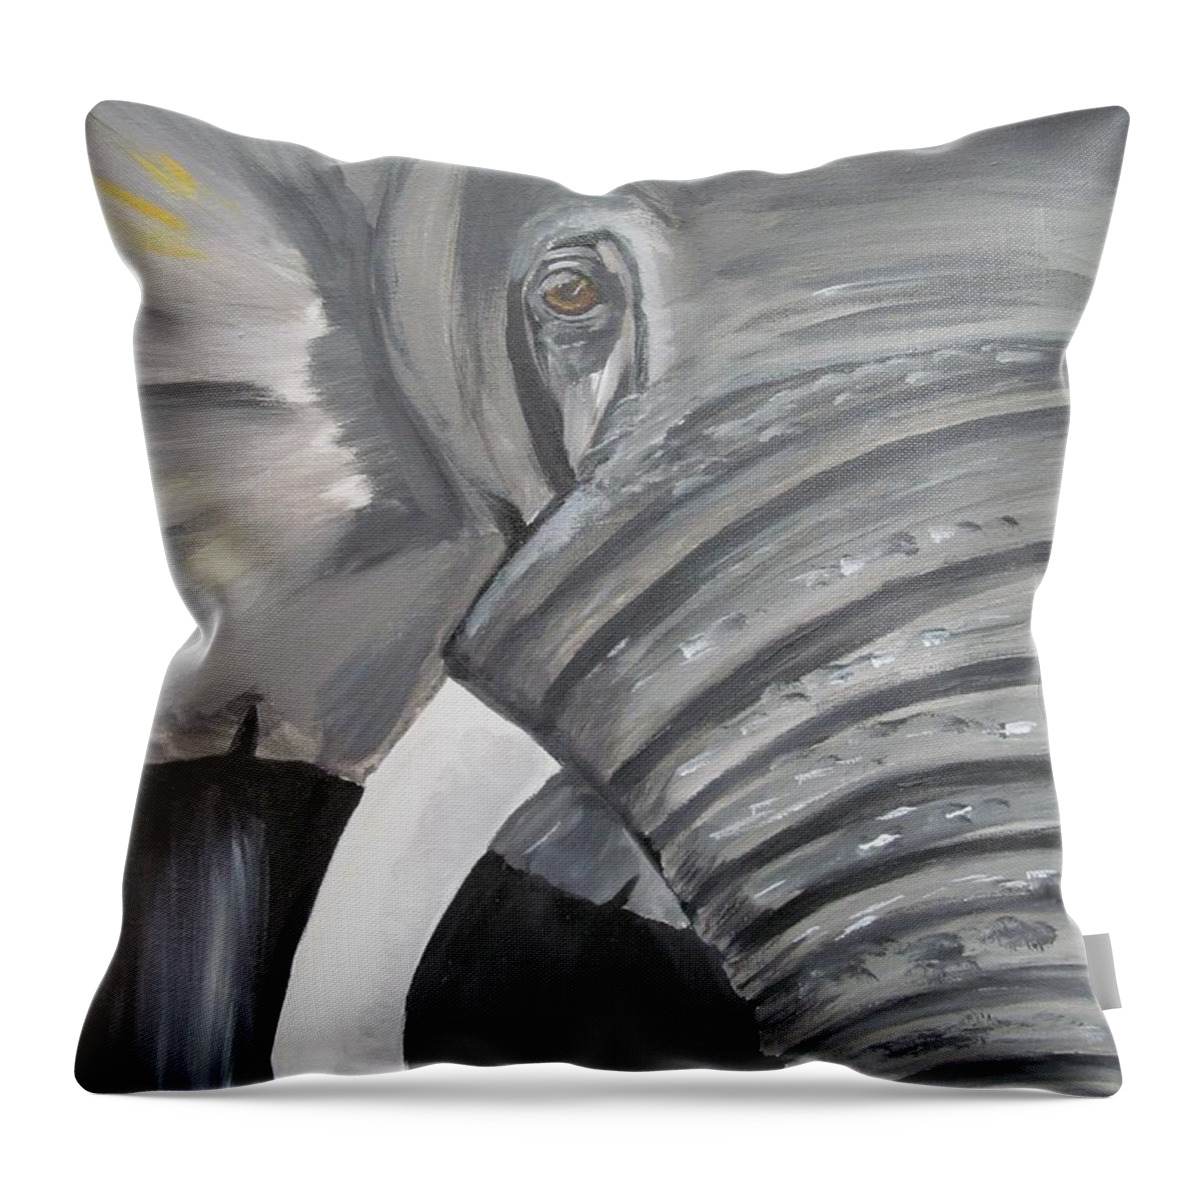 Elephant Throw Pillow featuring the painting Elephant by Susan Voidets